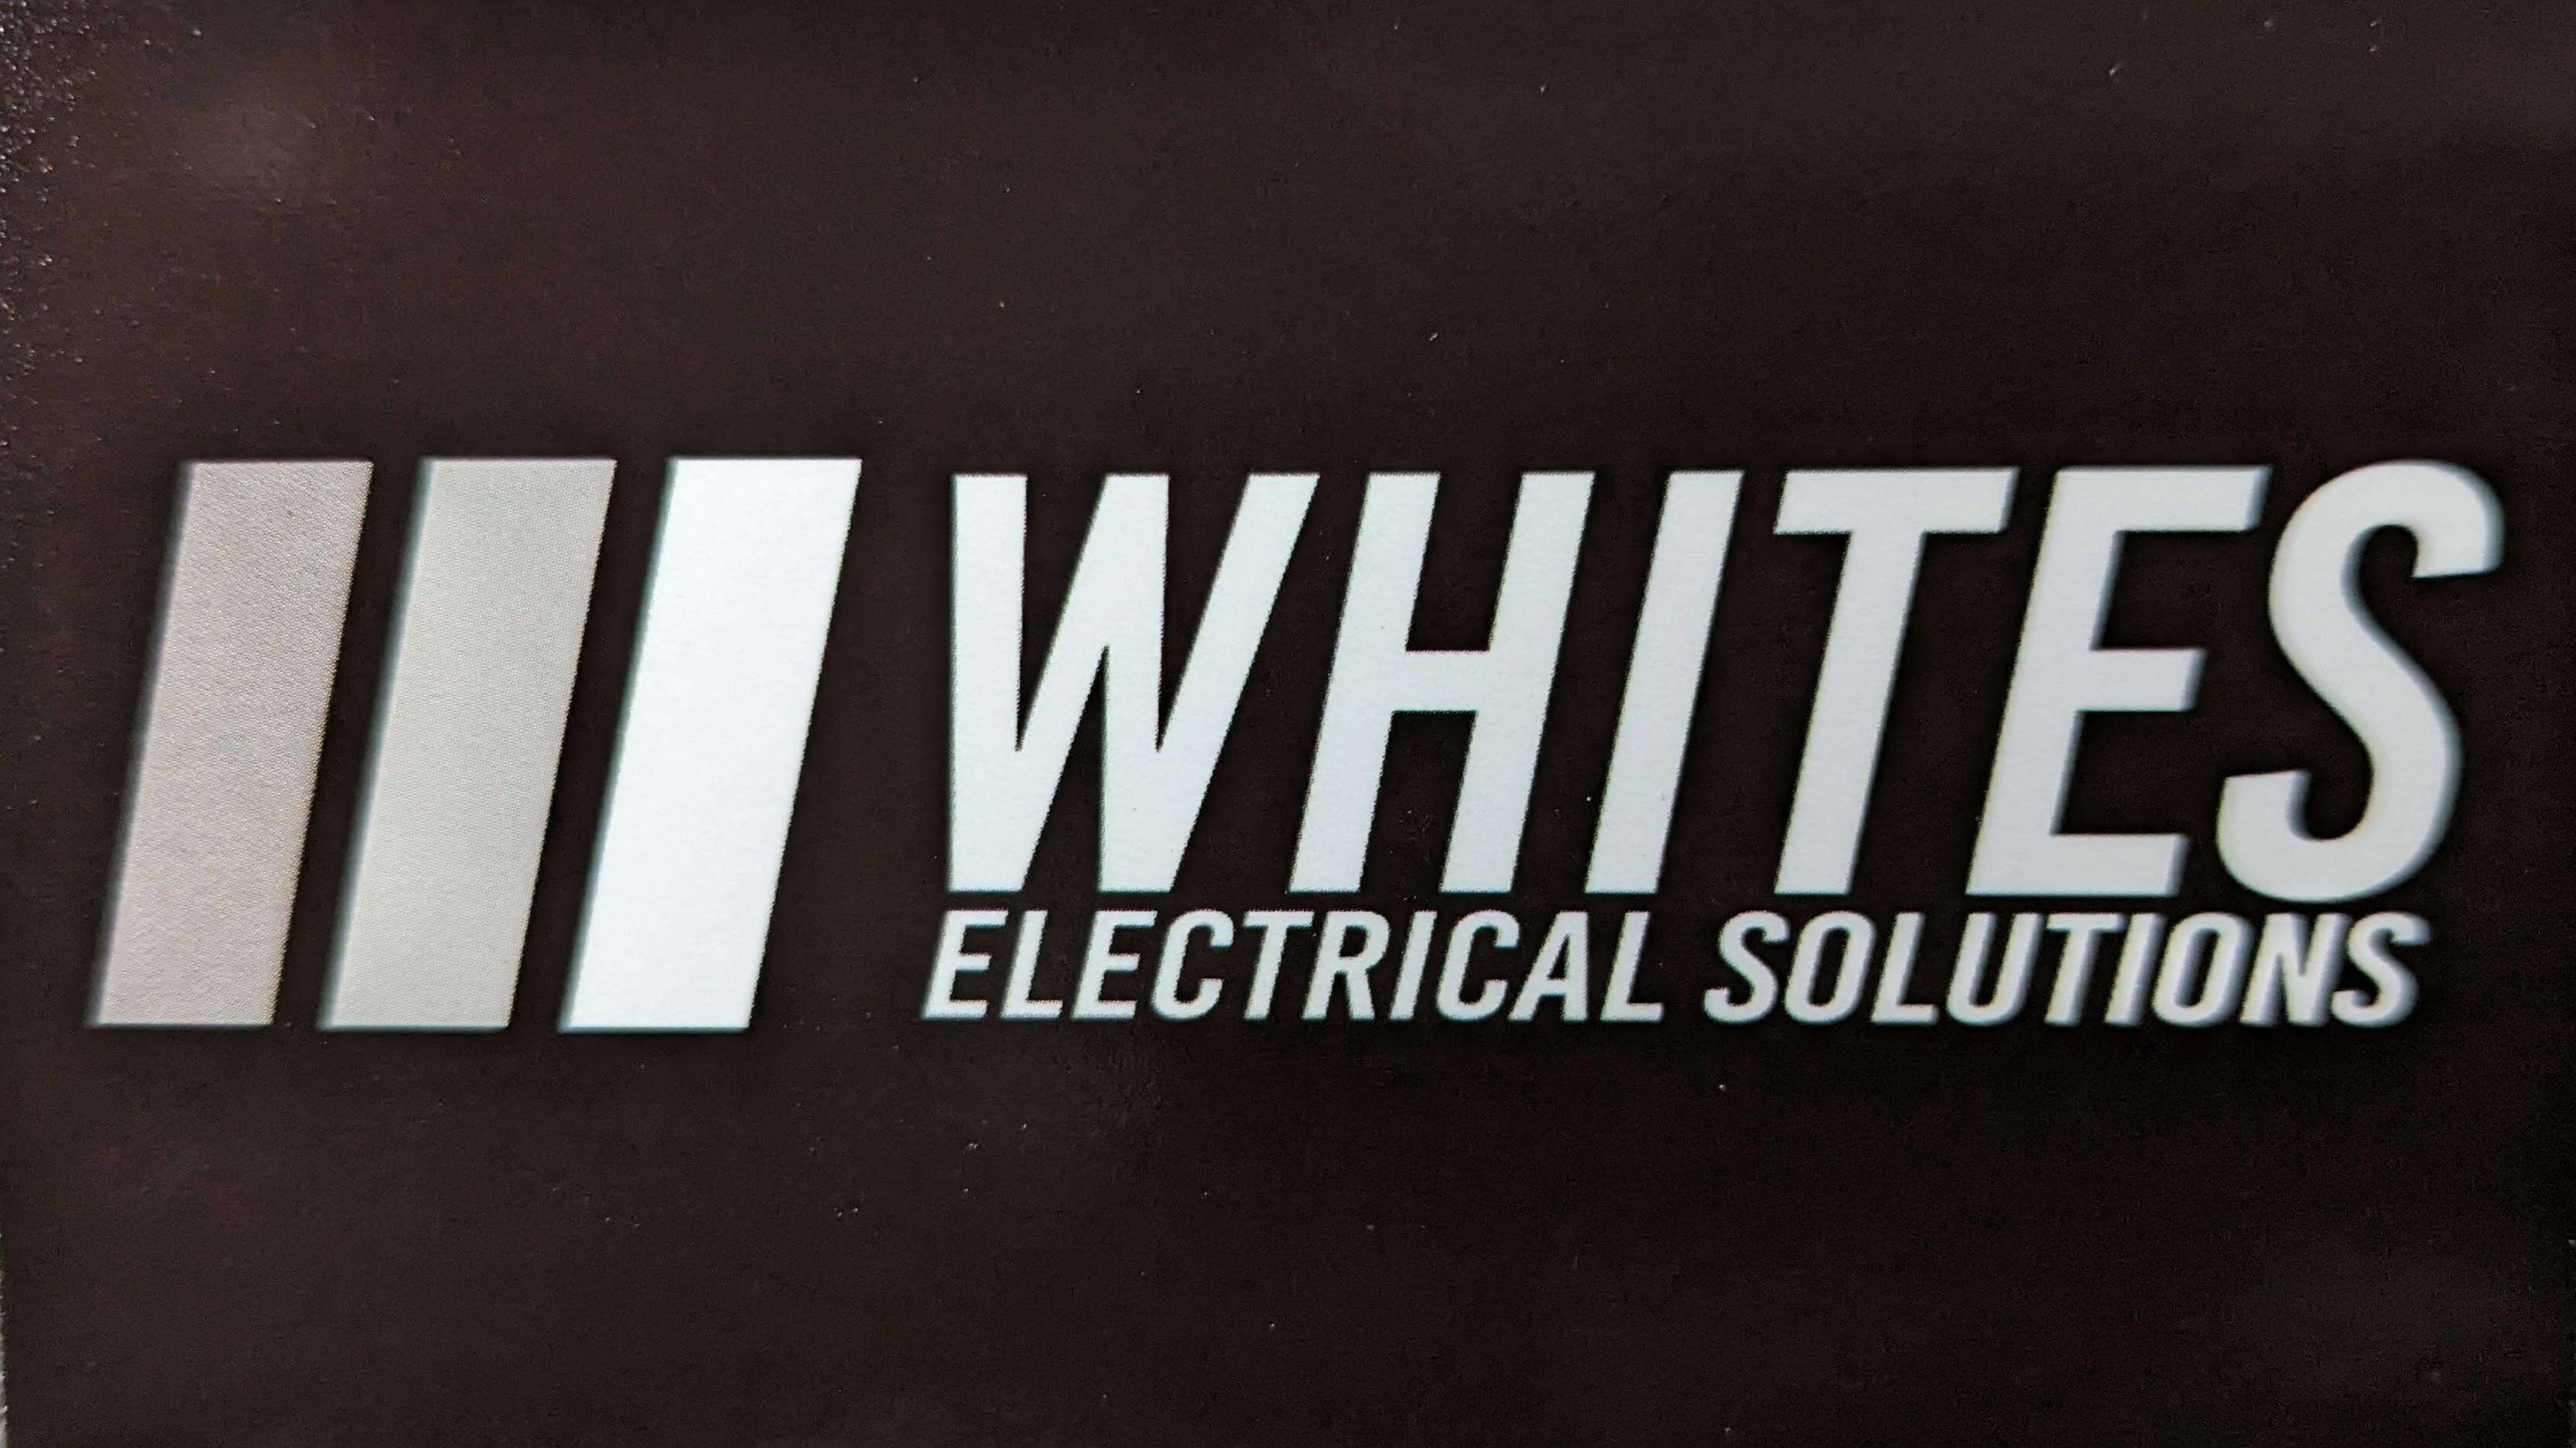 Whites Electrical Solutions